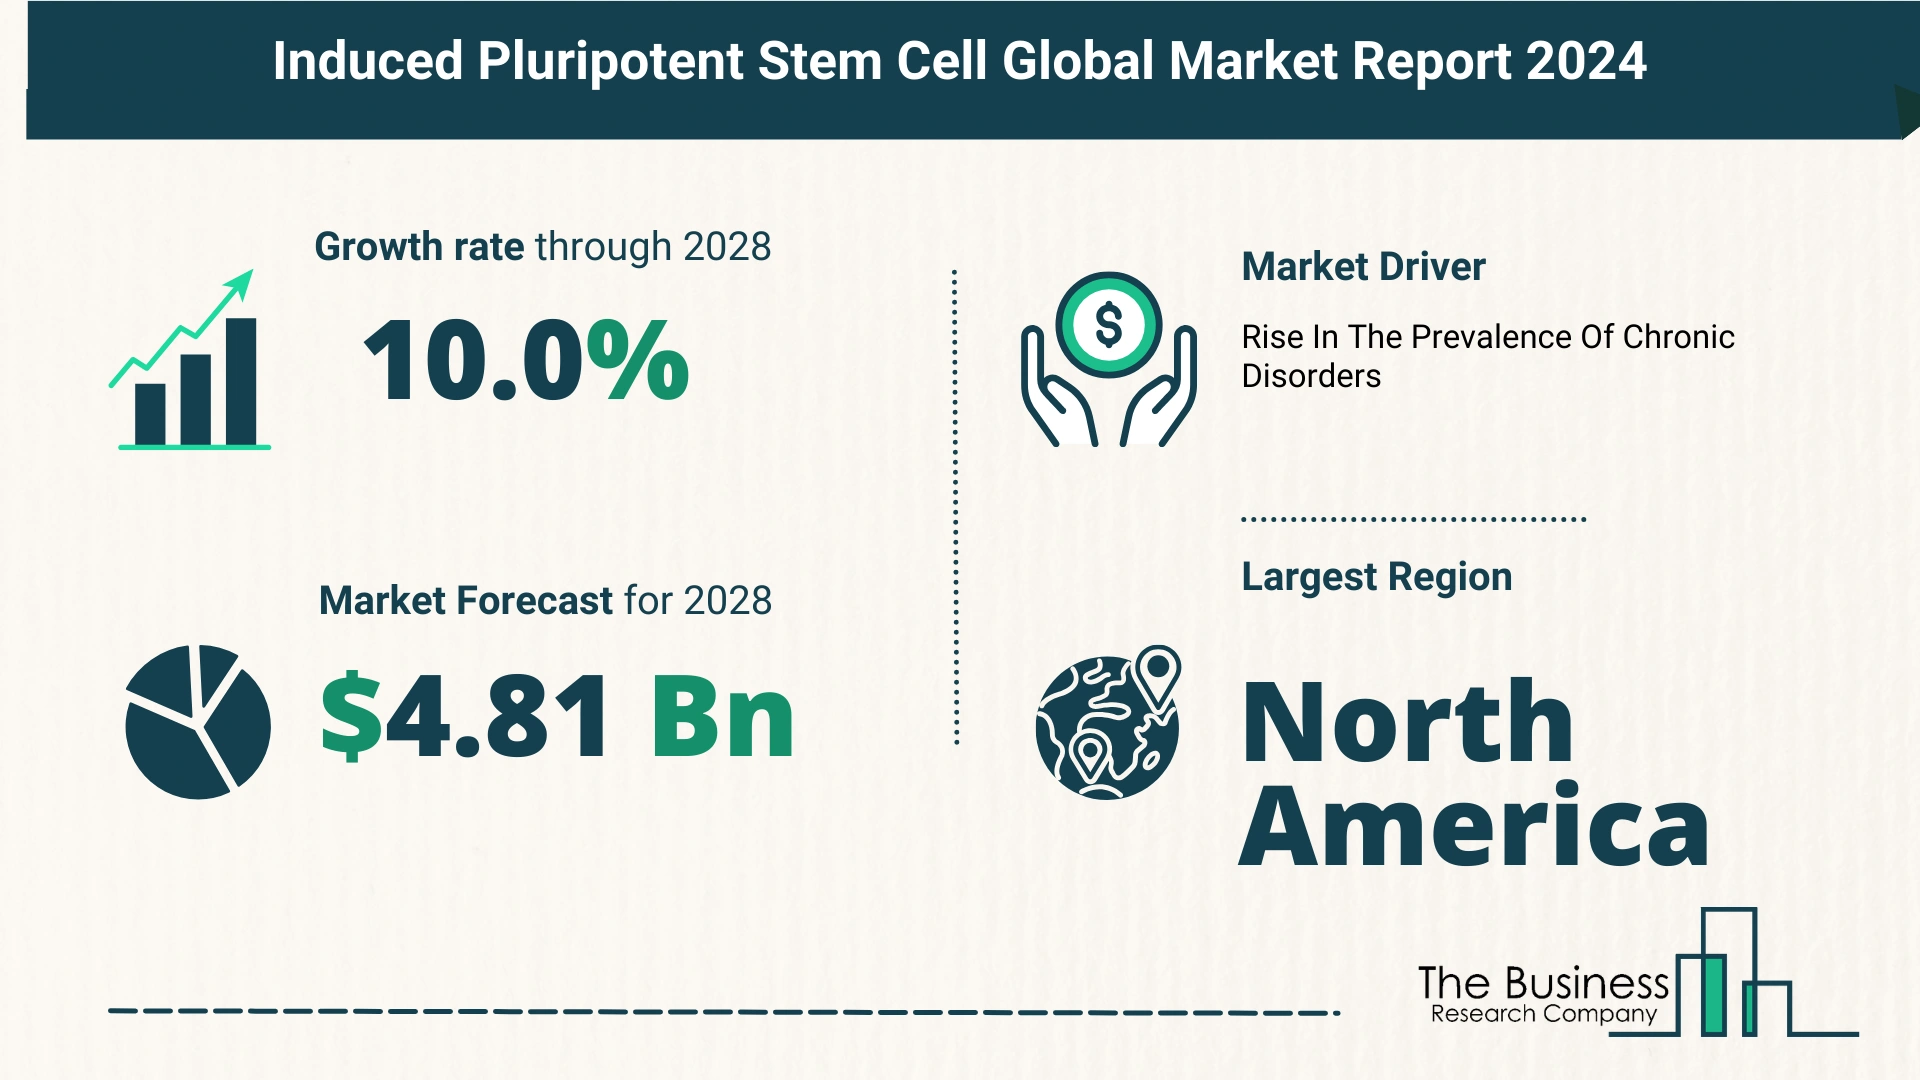 Global Induced Pluripotent Stem Cell (iPSC) Market